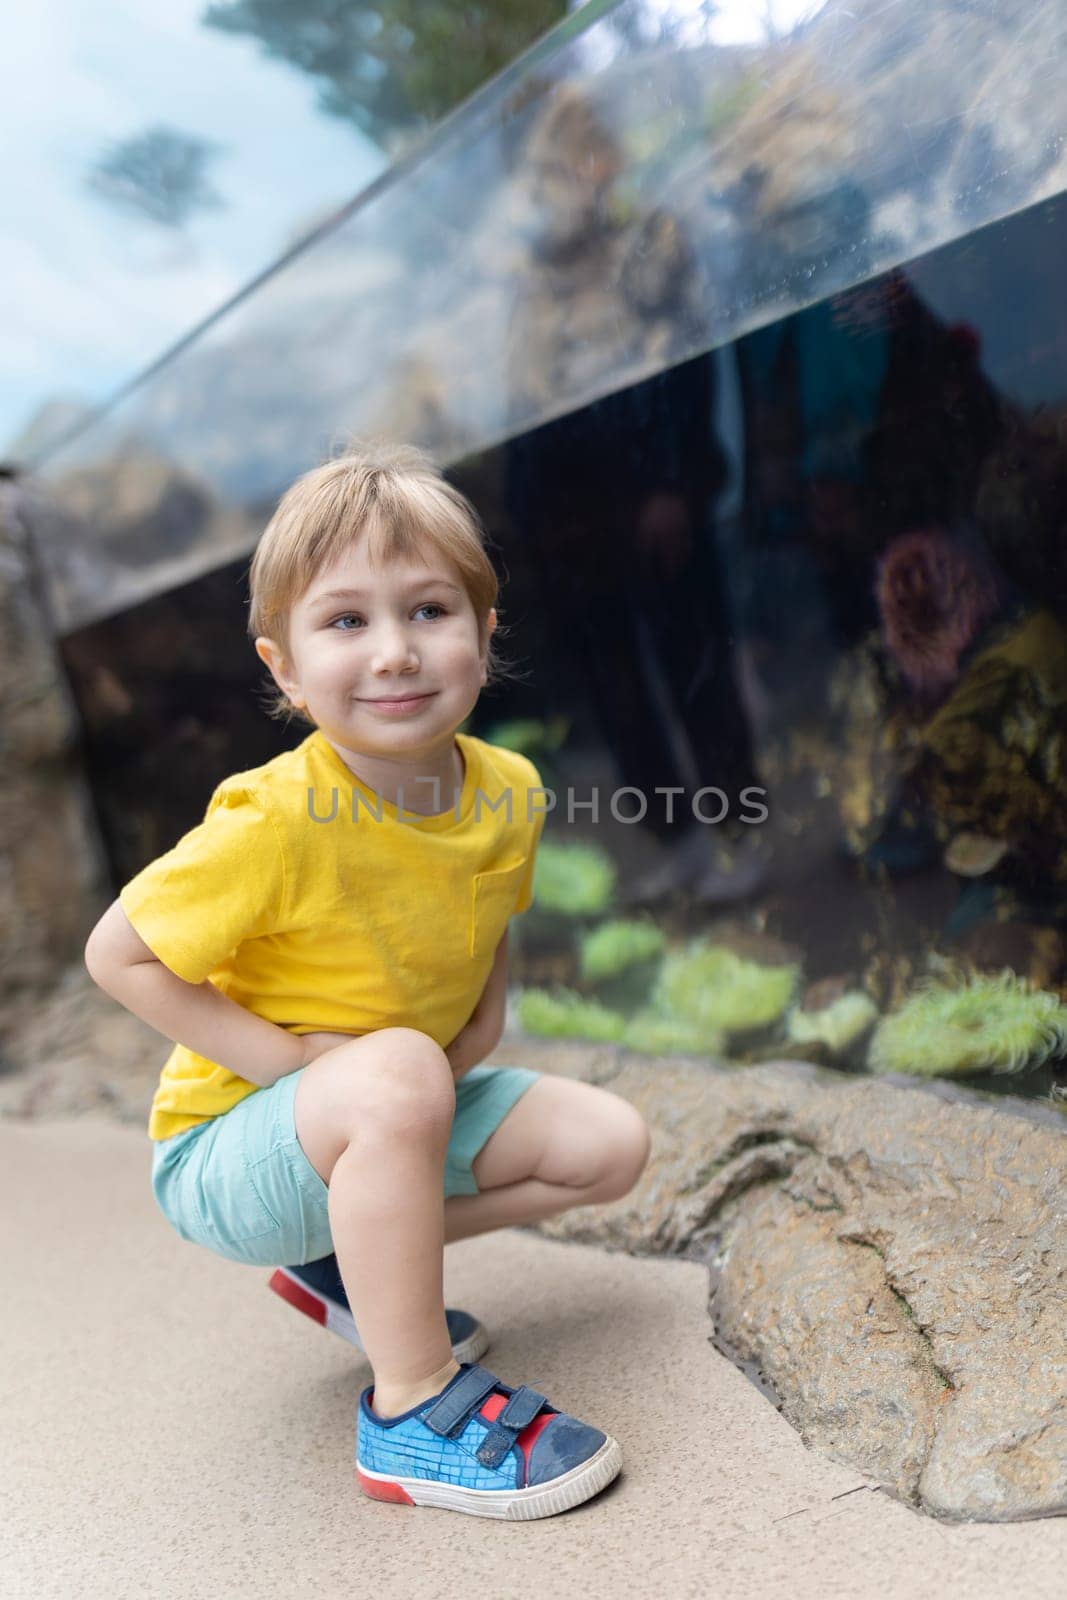 A young boy in a yellow shirt is crouching down in front of a fish tank by Studia72